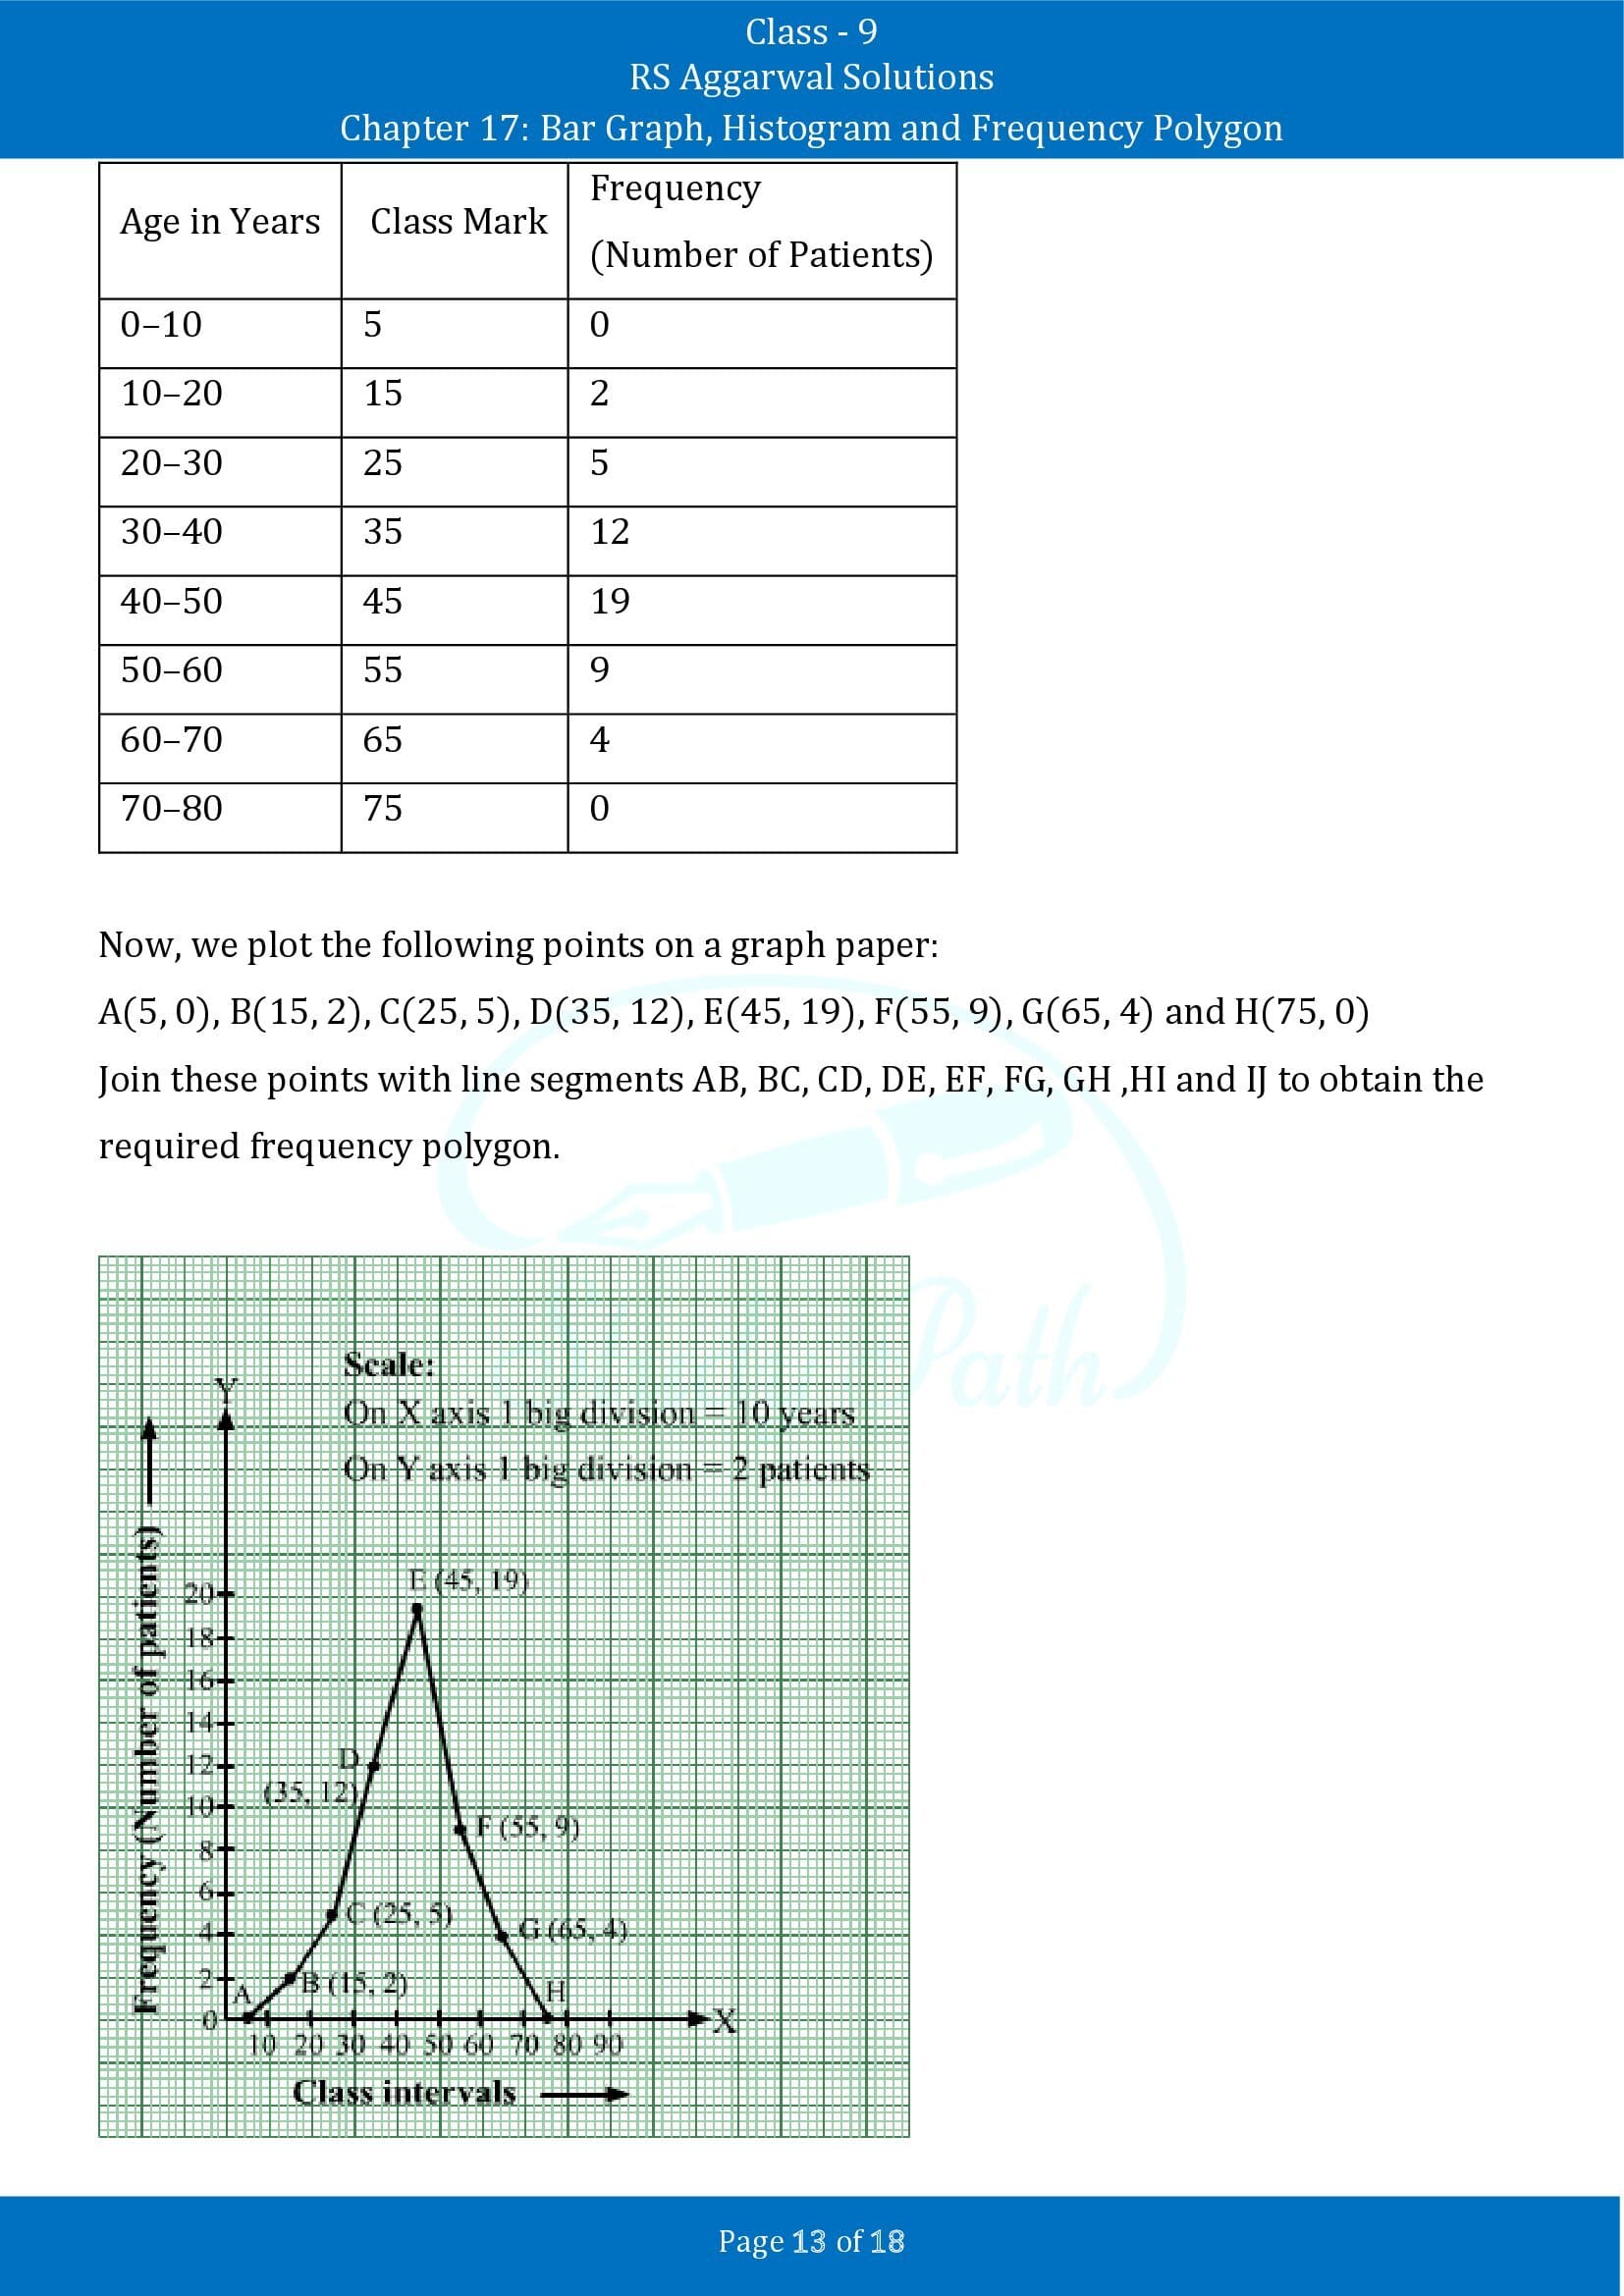 RS Aggarwal Solutions Class 9 Chapter 17 Bar Graph Histogram and Frequency Polygon Exercise 17B 00013